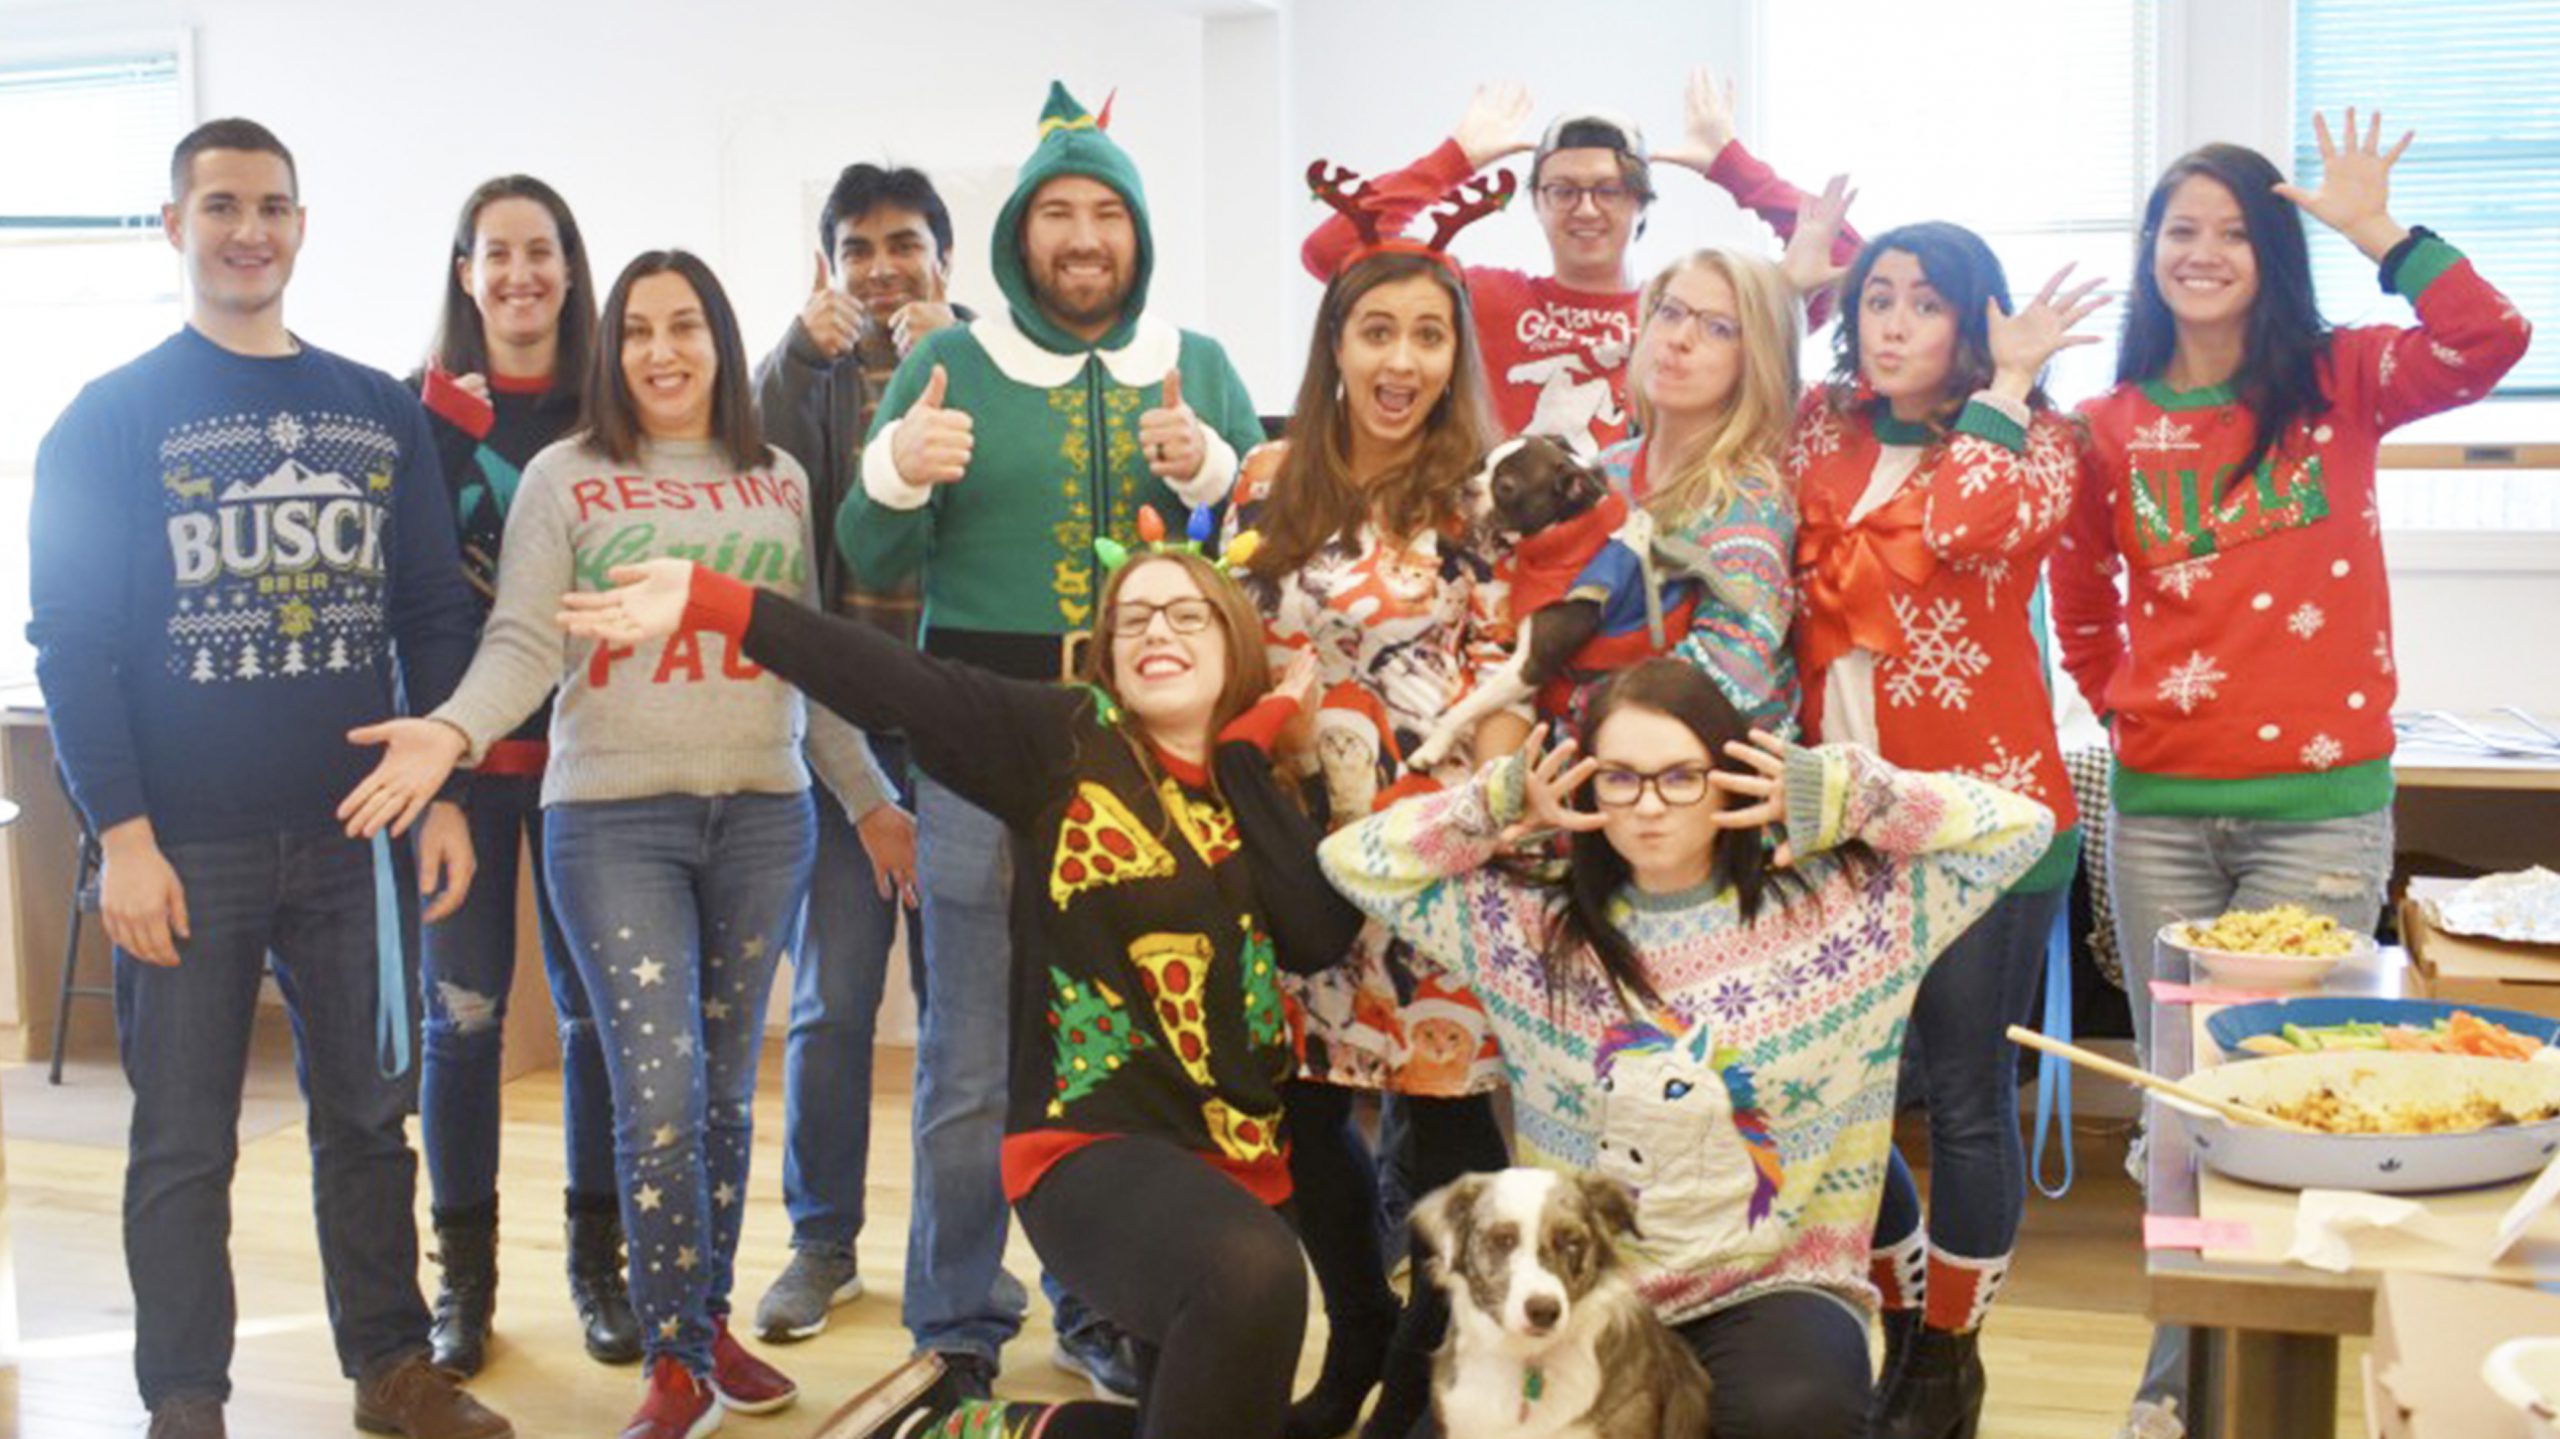 Silly Team photo, wearing holiday sweaters